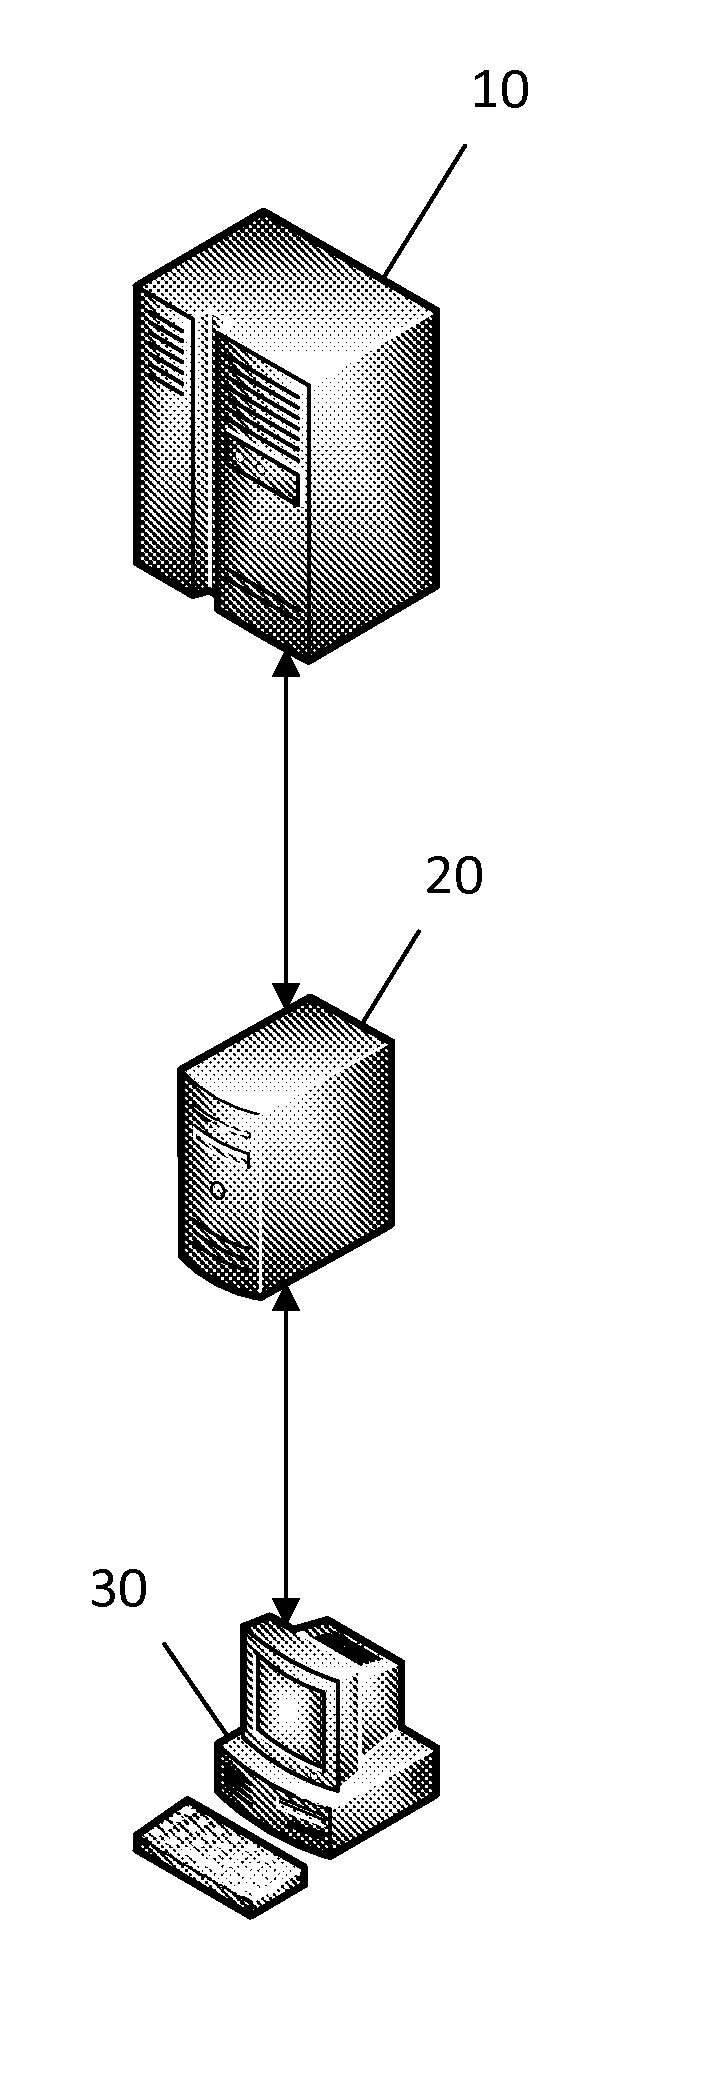 Method for Personalization and Utilization of a Series of Connected Devices